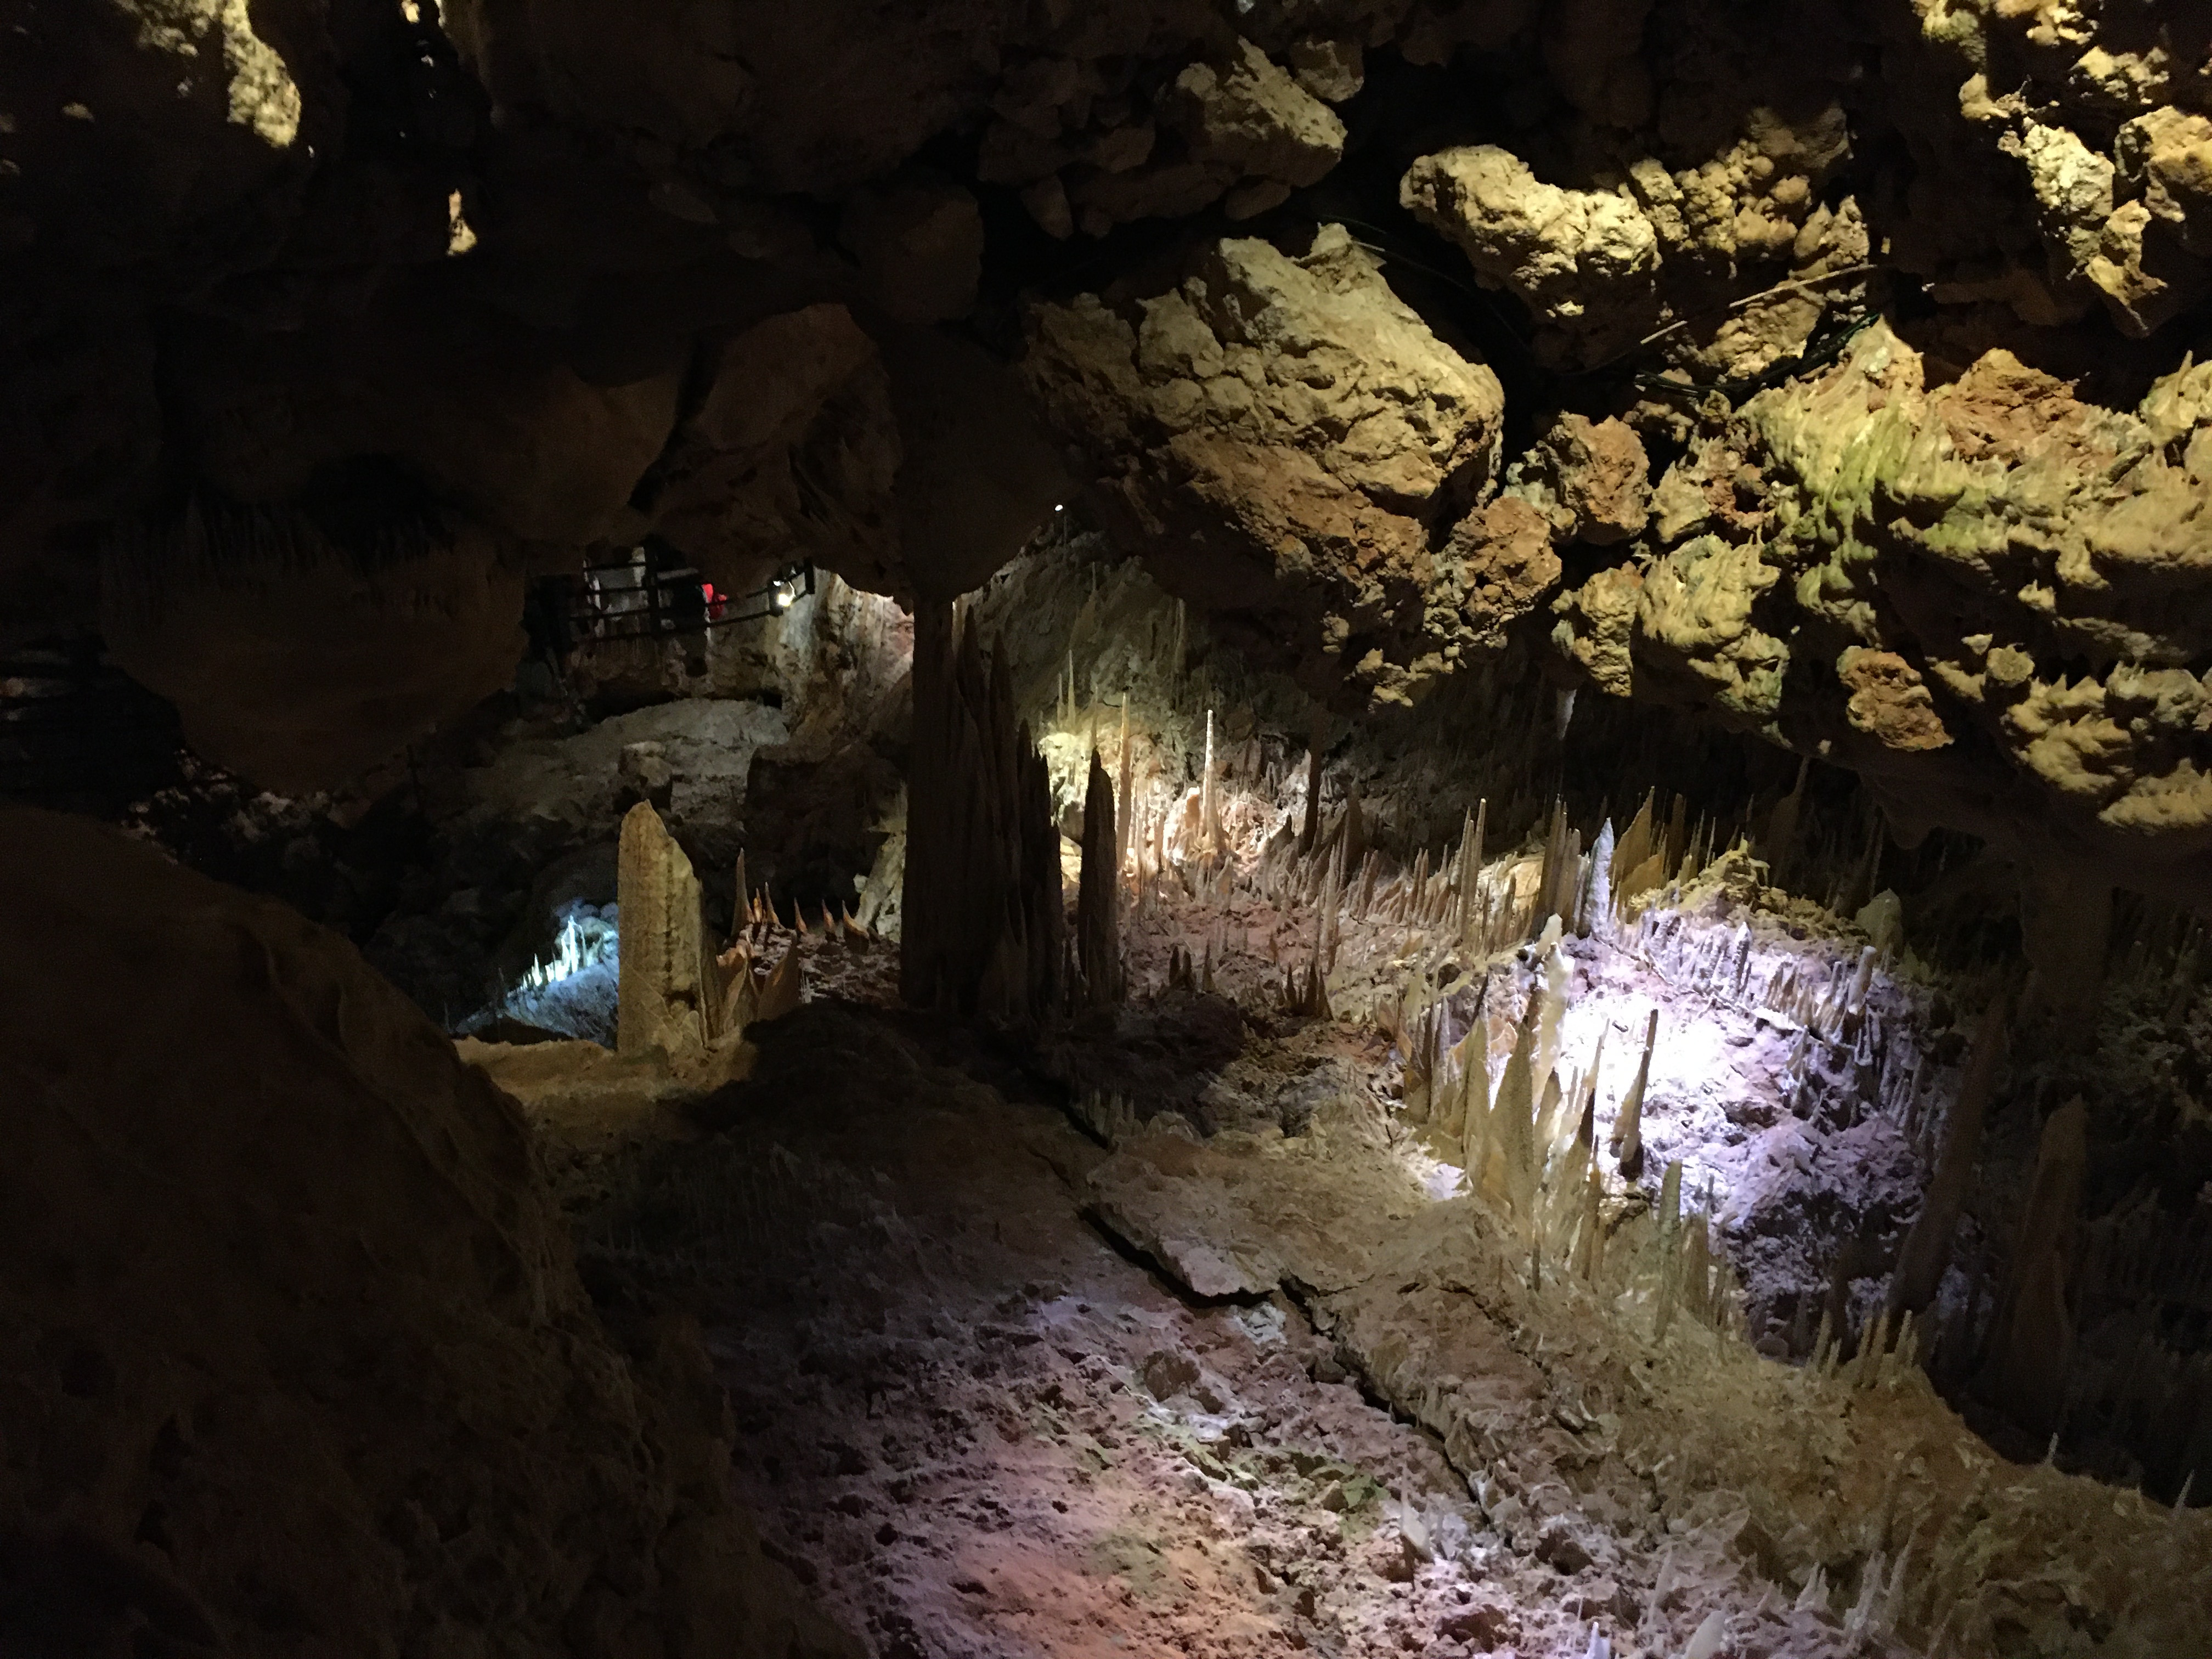 Part of the Ngiligi Cave network showing the natural toned lighting